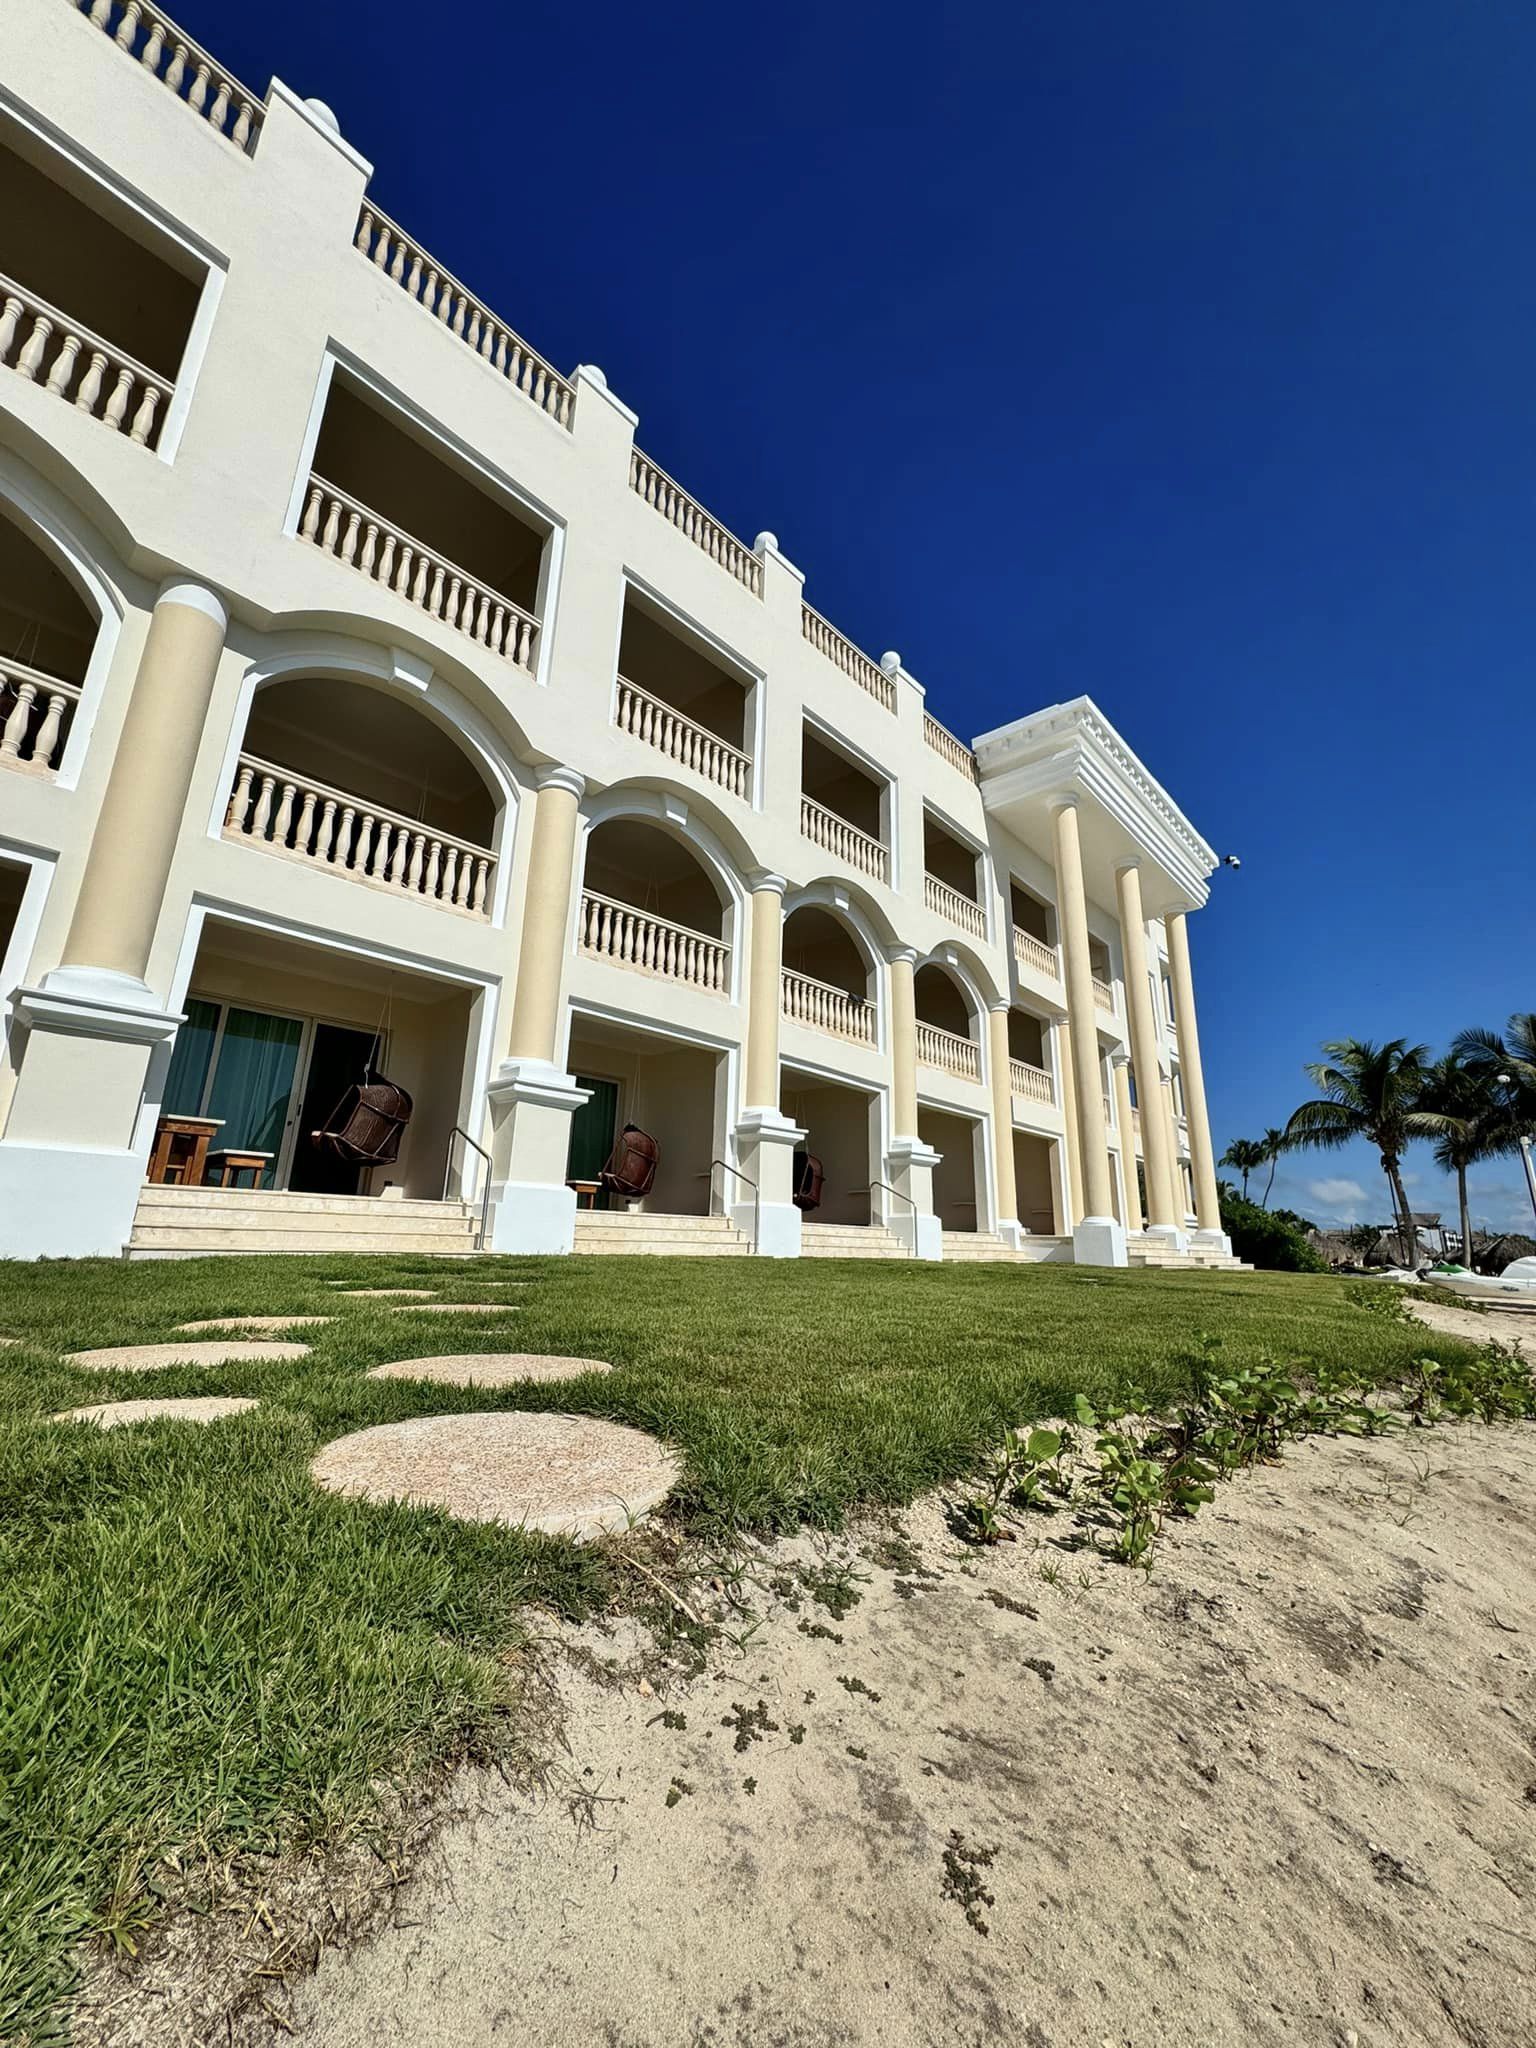 Iberostar Grand Paraiso Introduces Oceanfront Walkout Rooms With Direct Beach Access